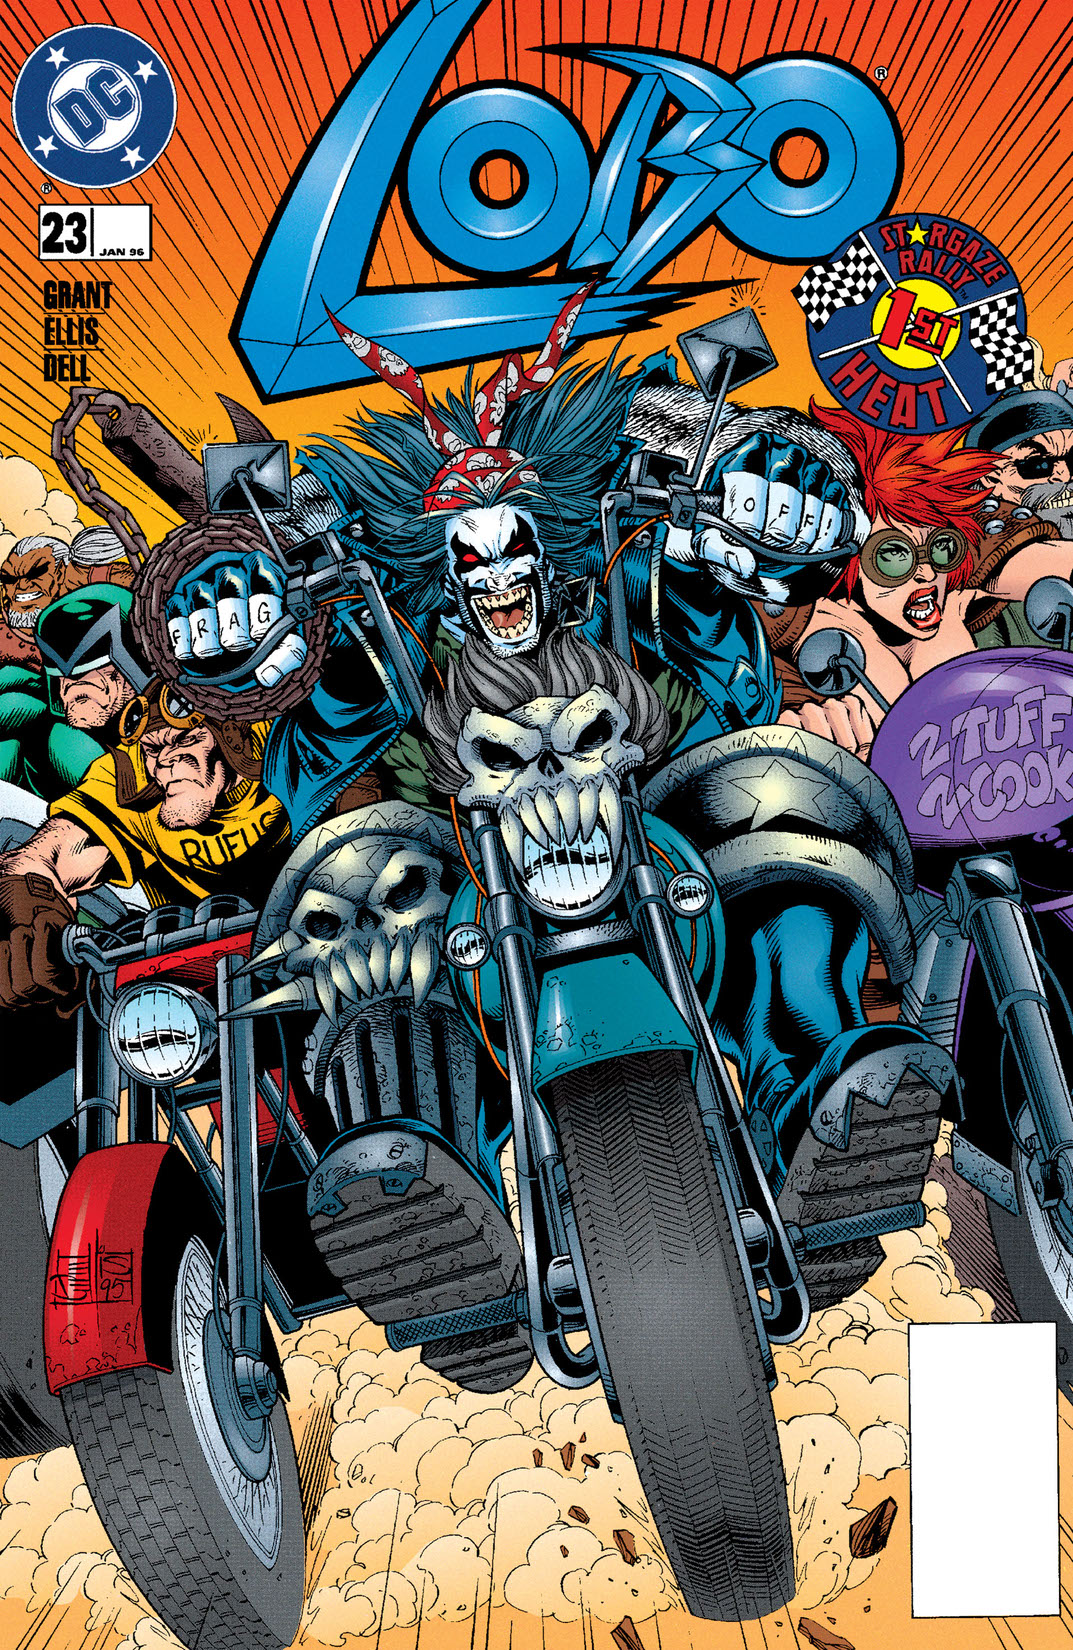 Lobo (1993-1999) #23 preview images